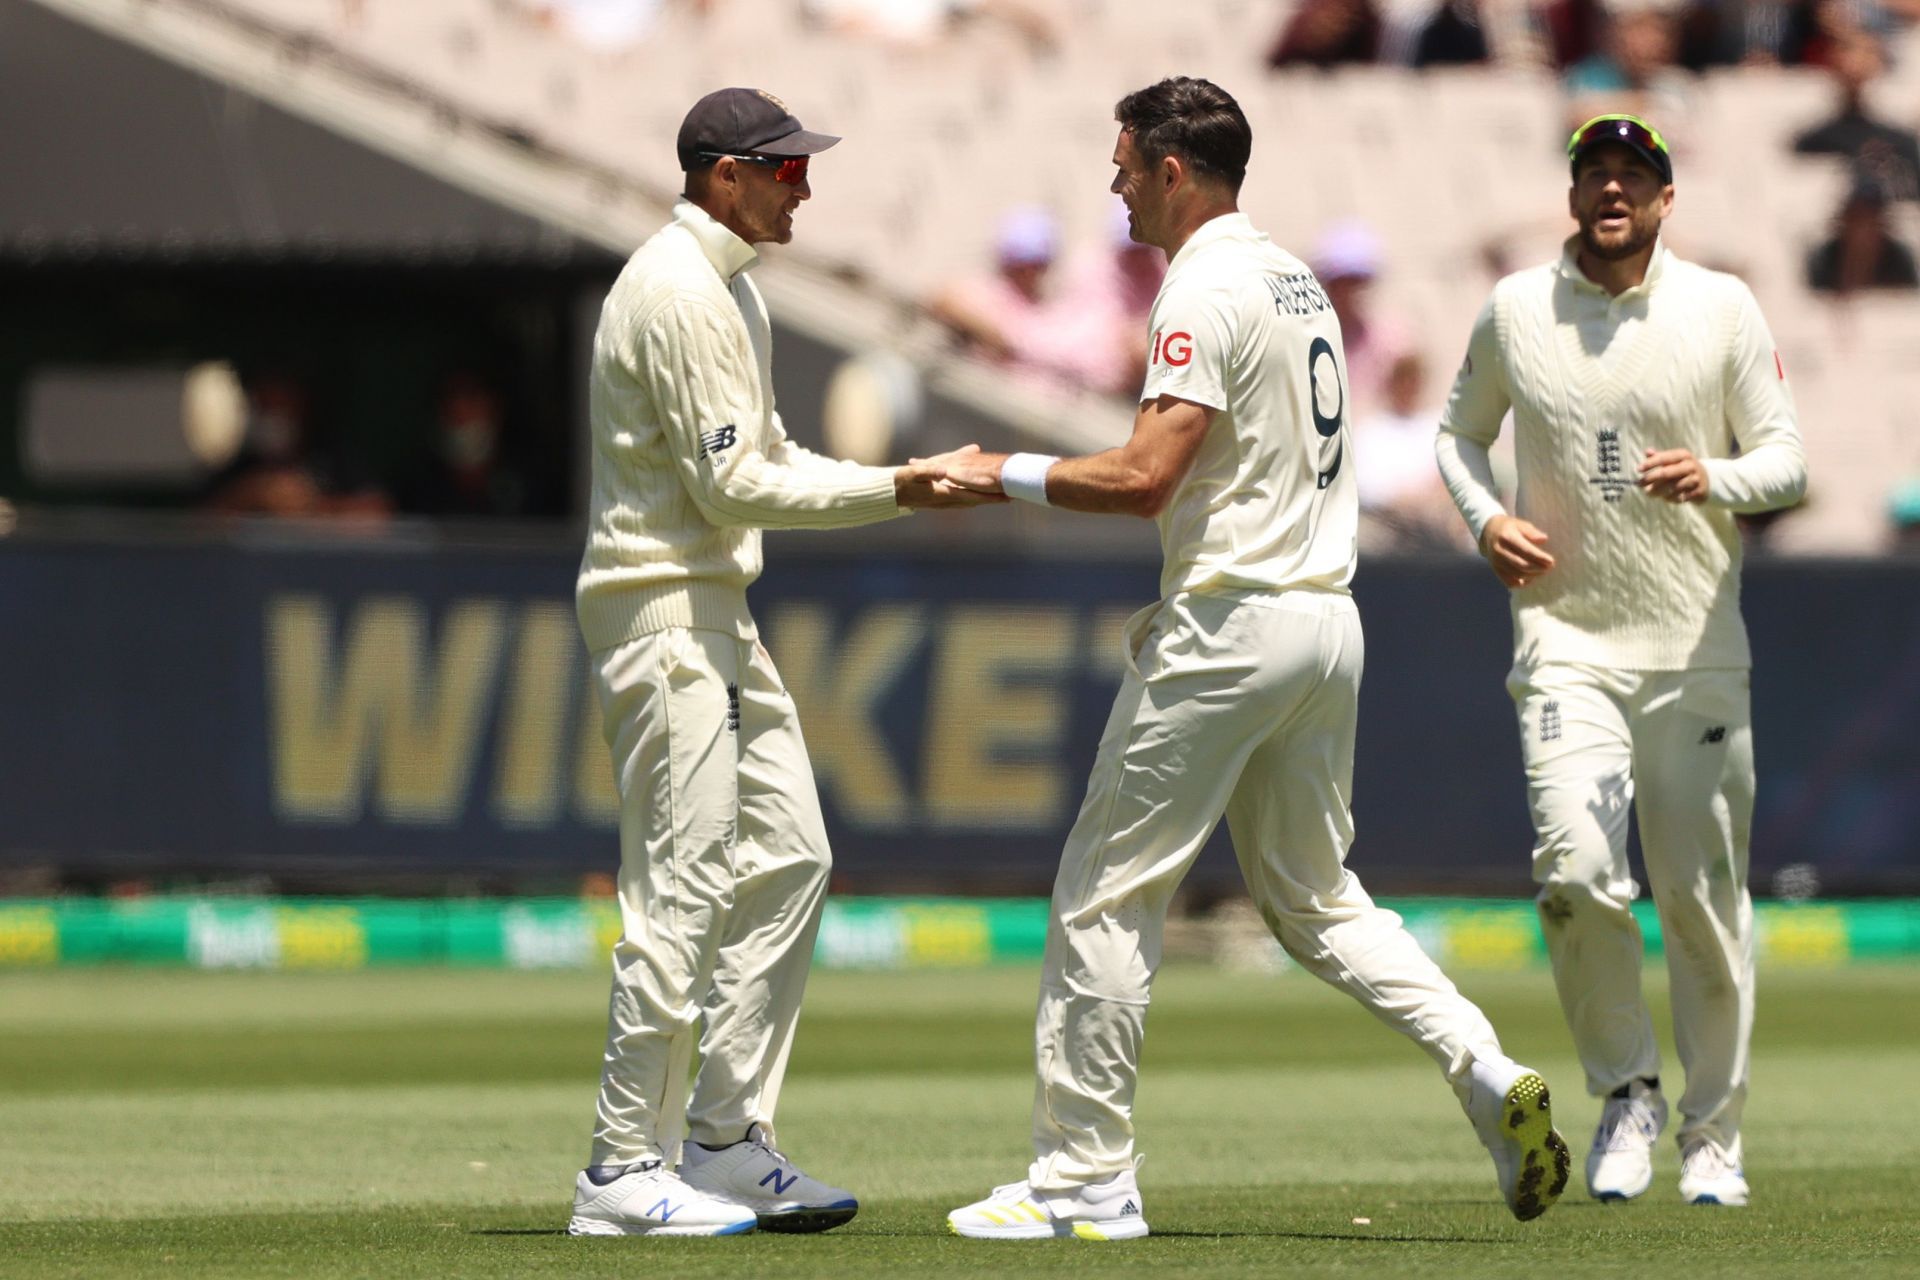 James Anderson celebrates with Joe Root after dismissing Steve Smith at the MCG.